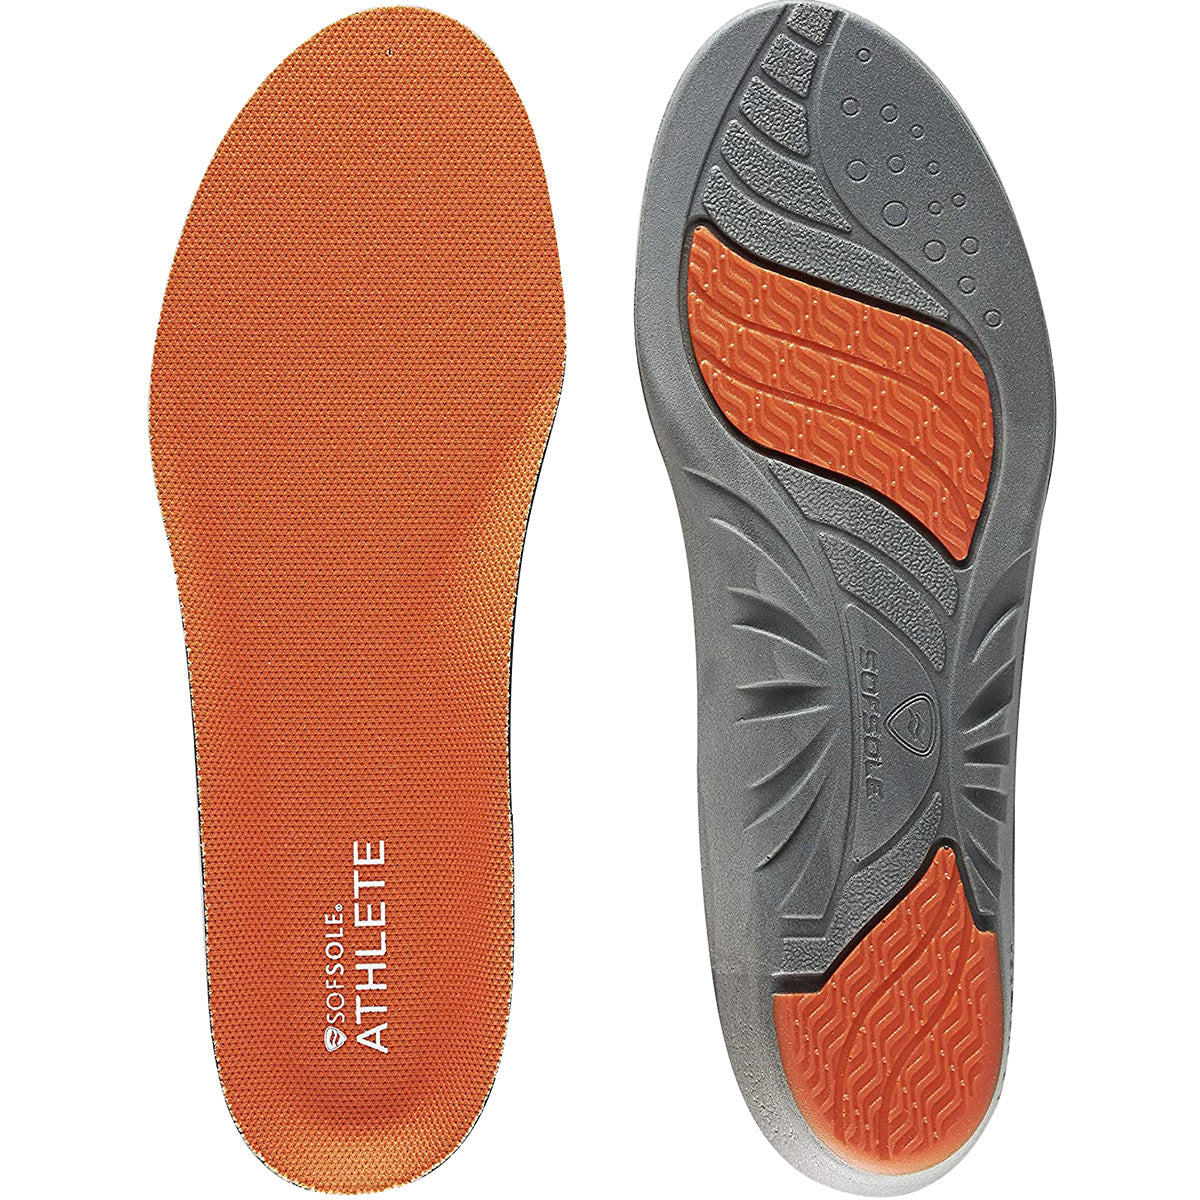 Sof Sole Athlete Full Length Shoe Insoles SofSole